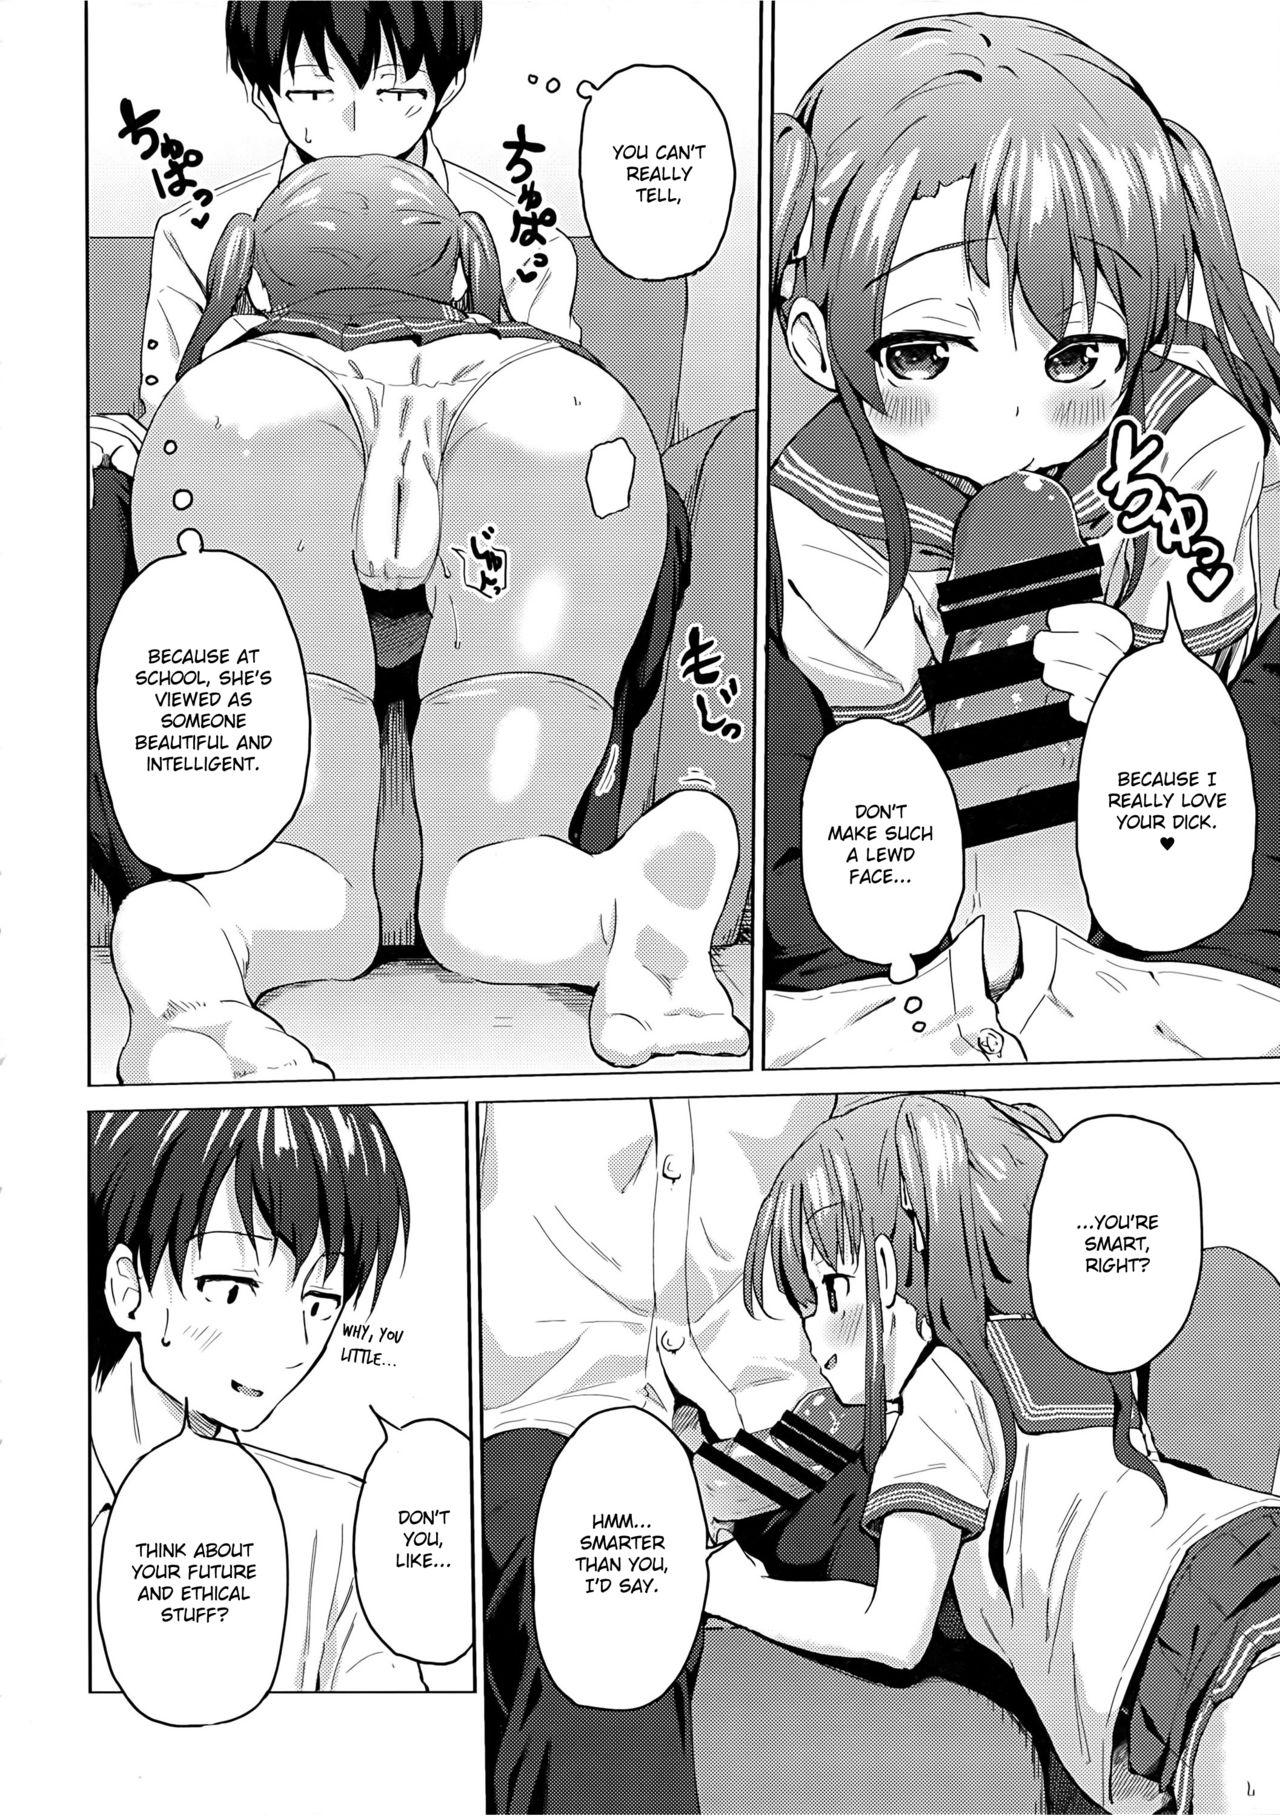 Nasty Porn Imouto wa Ani Senyou | A Little Sister Is Exclusive Only for Her Big Brother - Original 18yo - Page 7